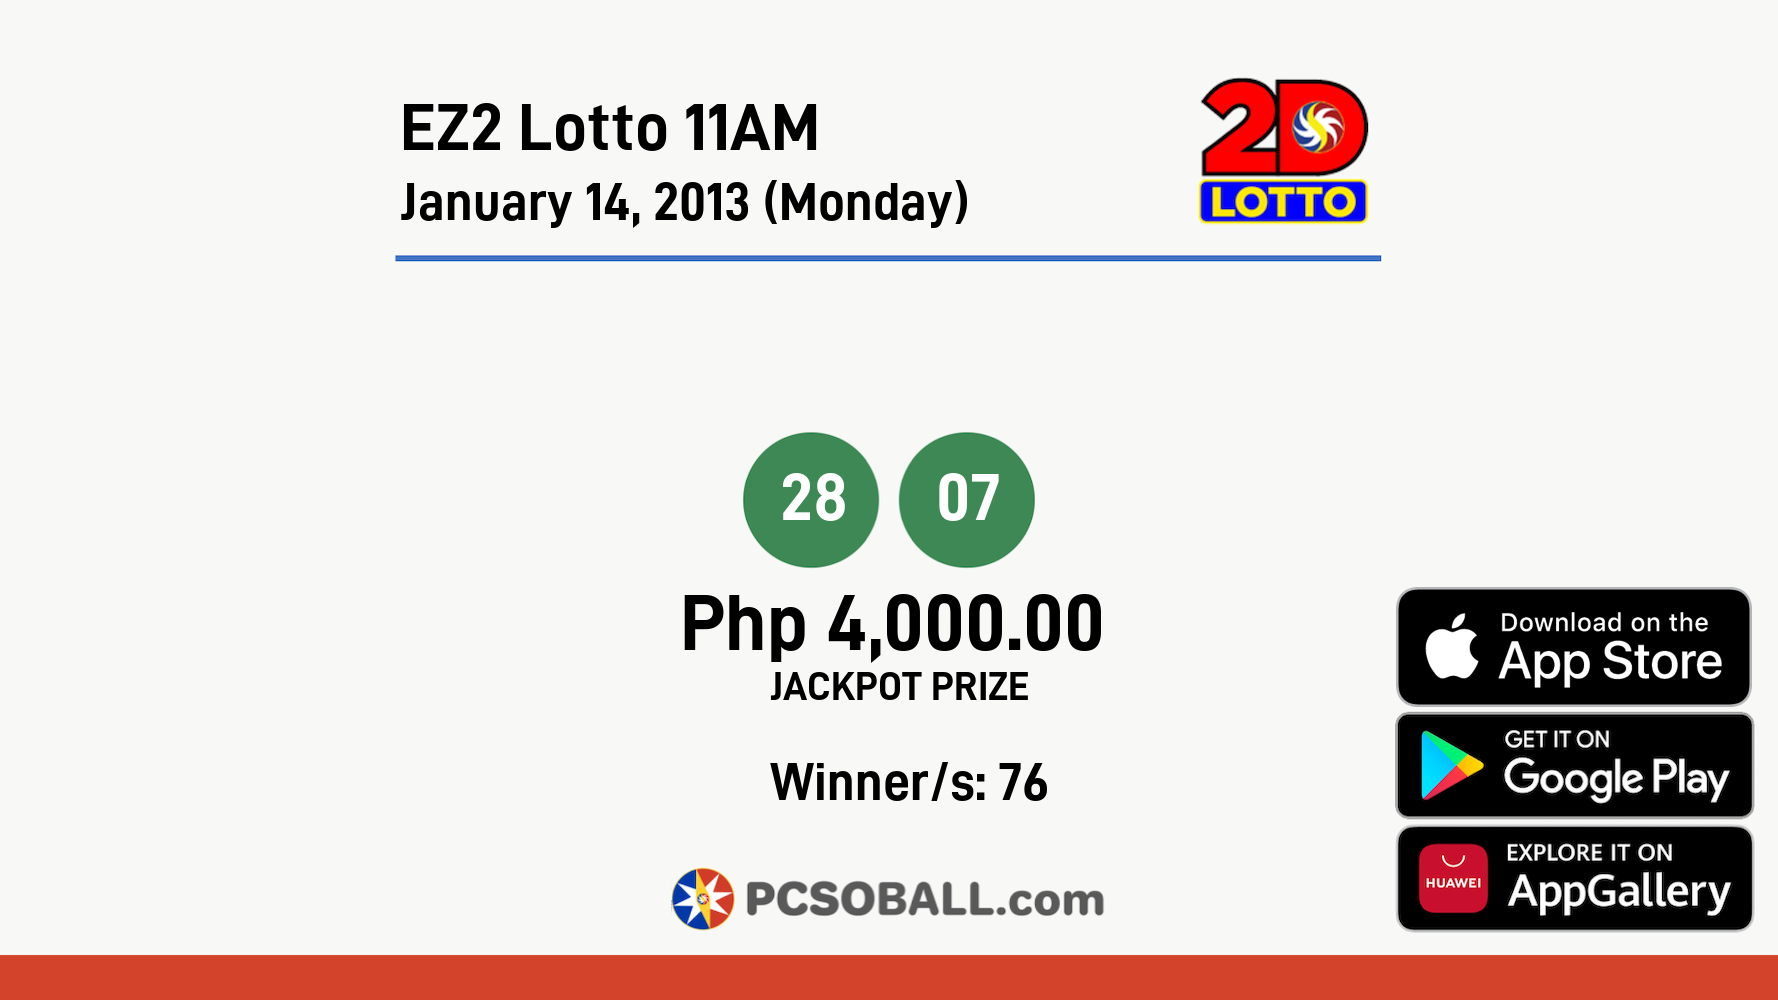 EZ2 Lotto 11AM January 14, 2013 (Monday) Result